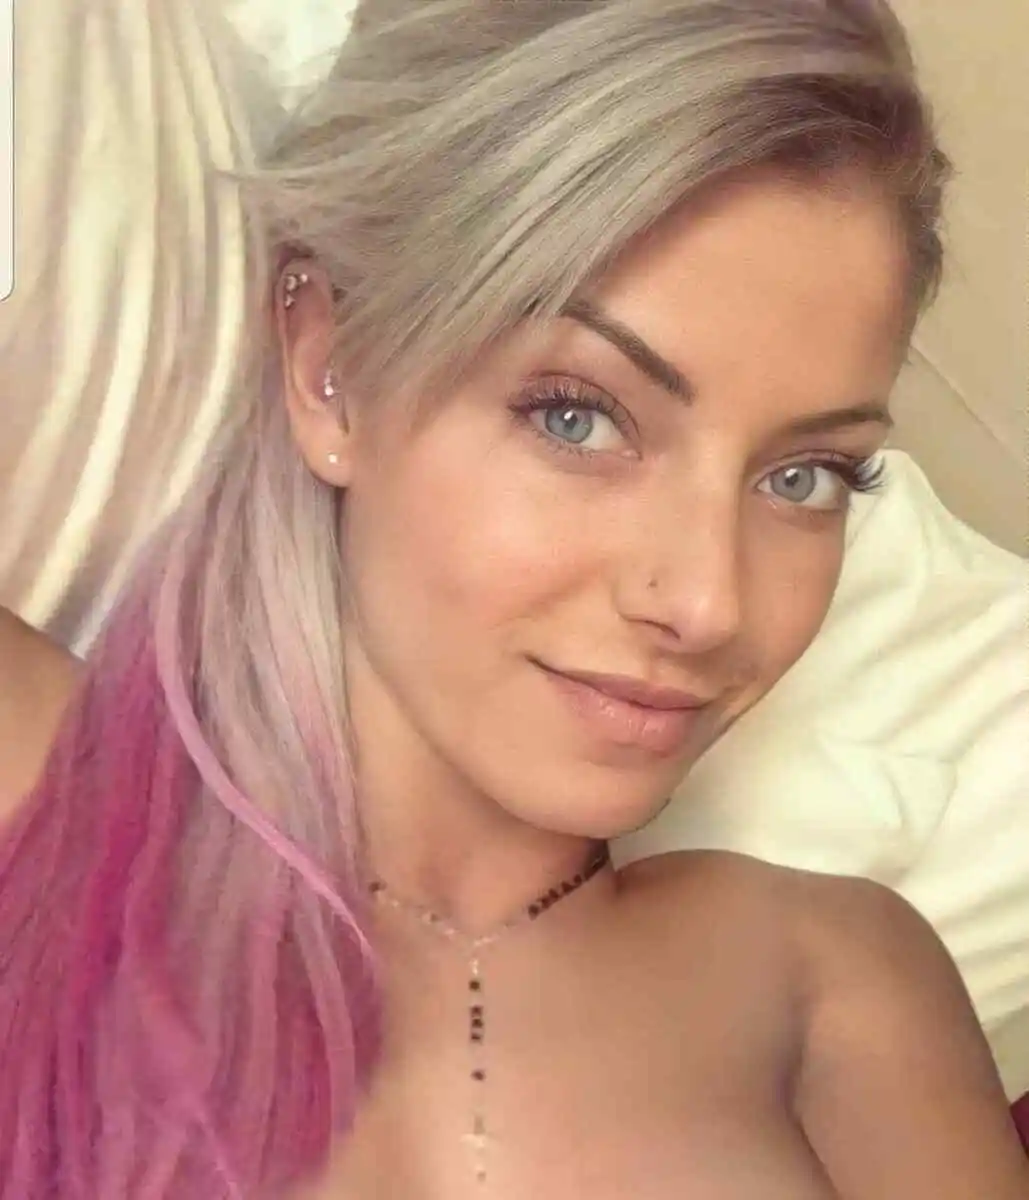 al kristensen recommends alexa bliss nude real pic